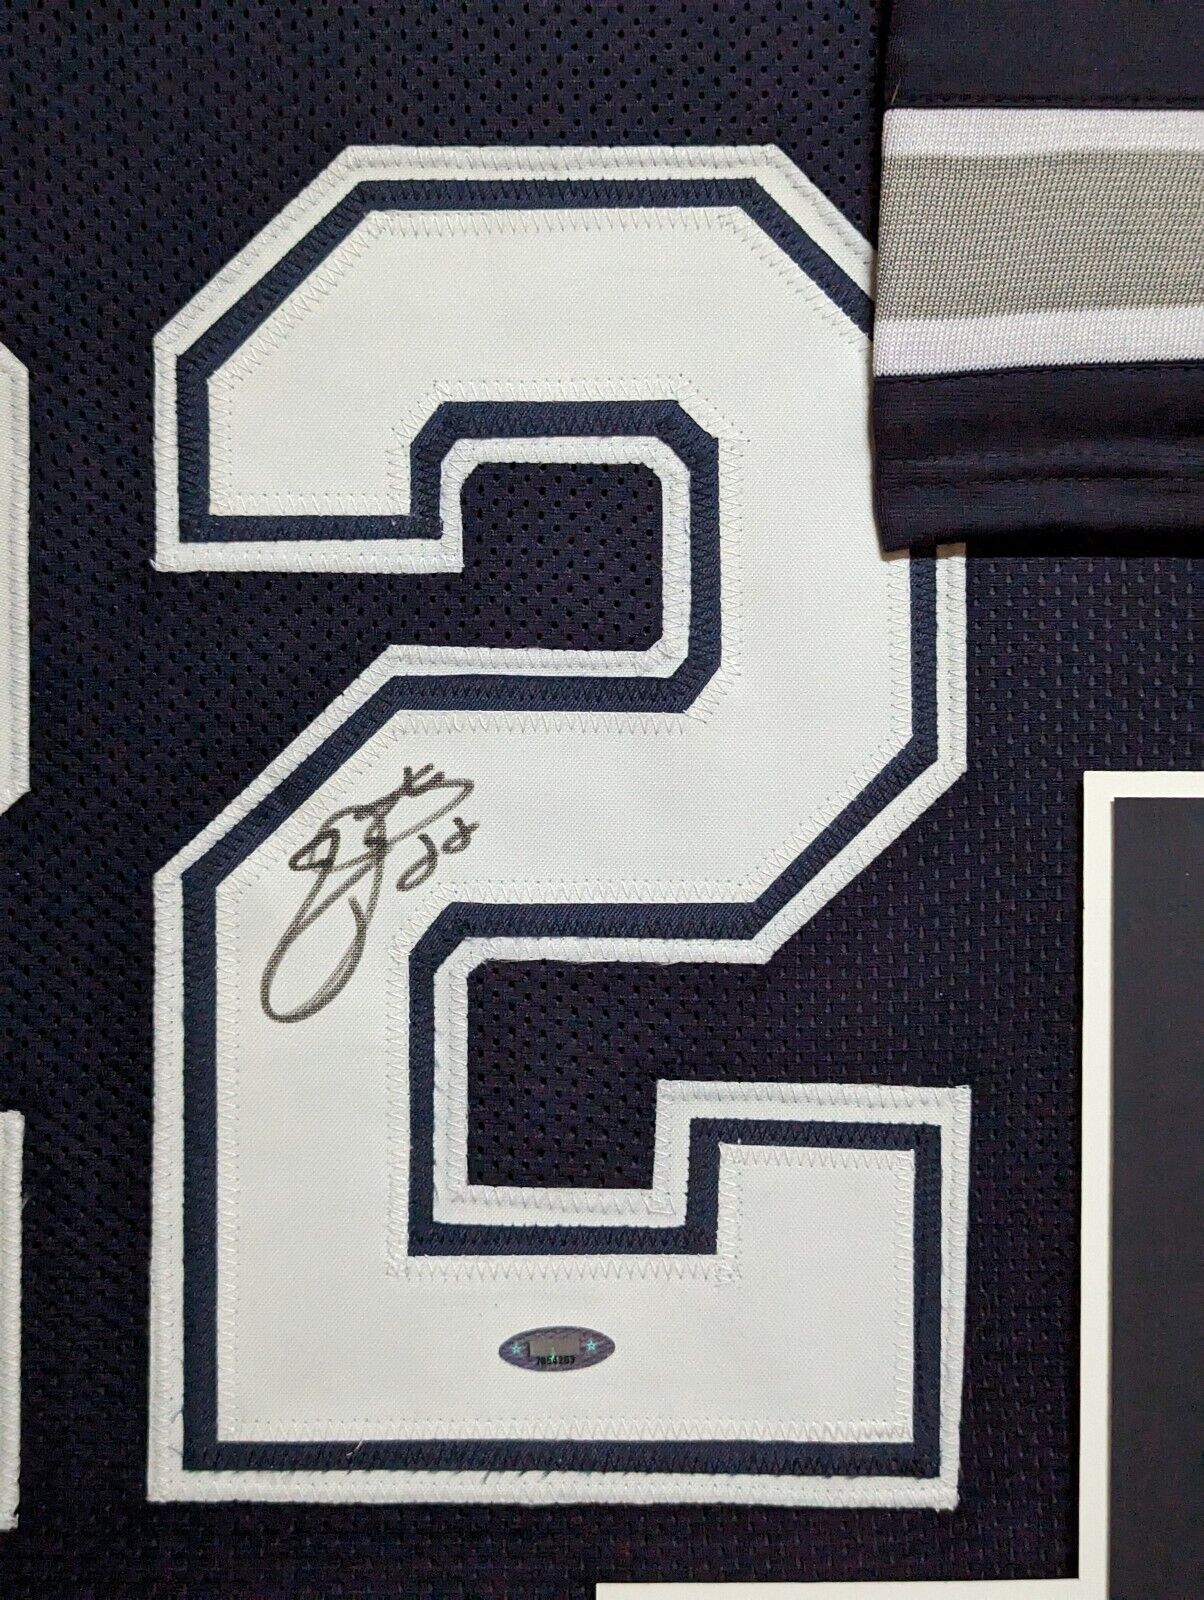 MVP Authentics Framed Dallas Cowboys Emmitt Smith Autographed Signed Jersey Tristar Holo 607.50 sports jersey framing , jersey framing